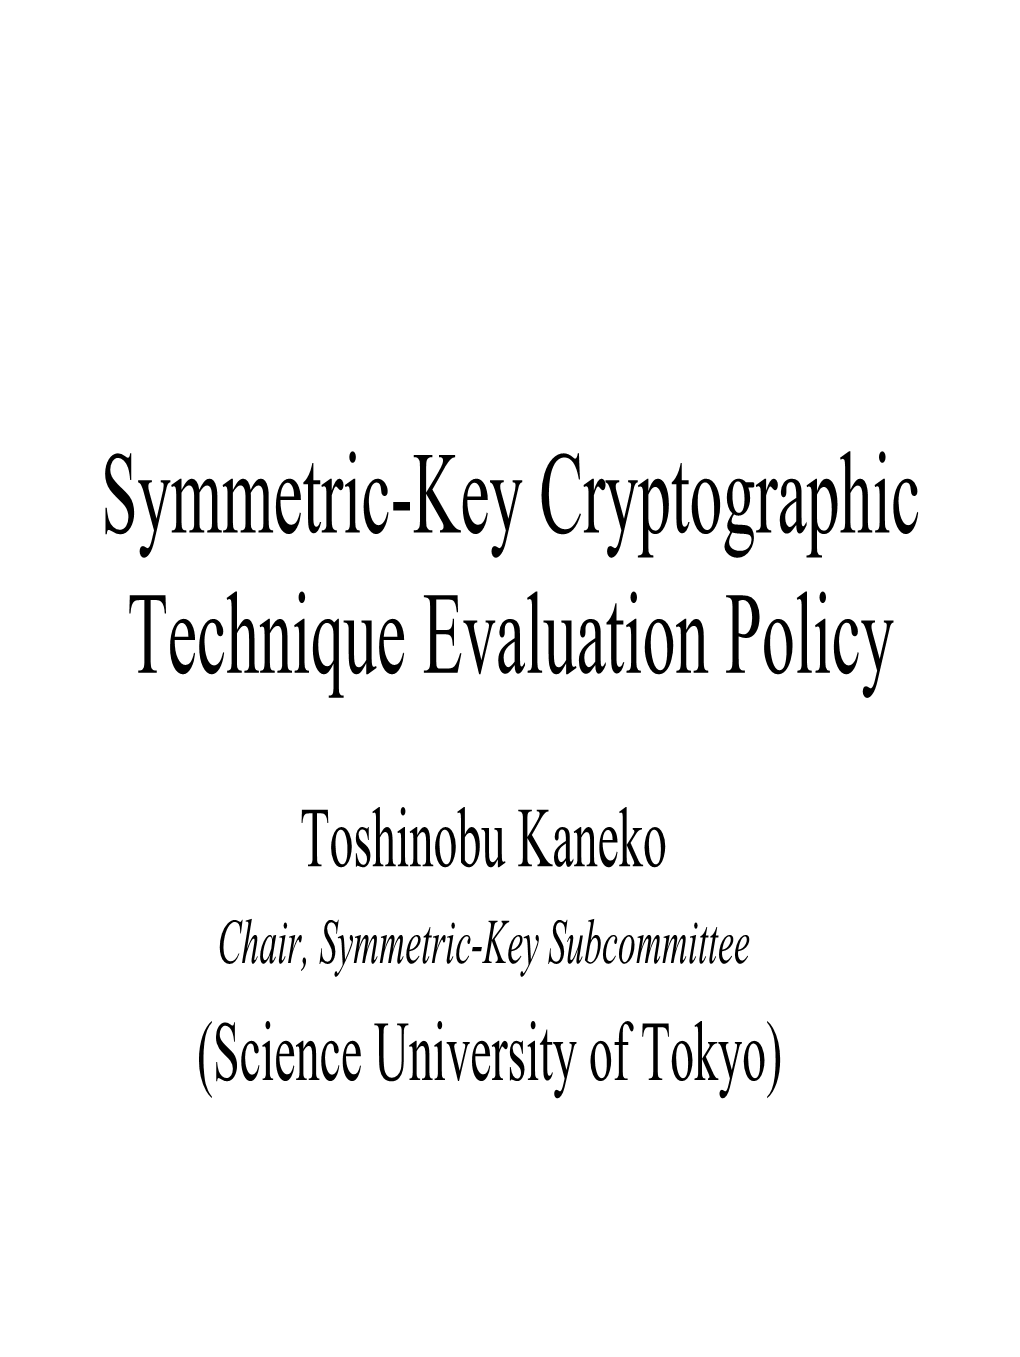 Symmetric-Key Cryptographic Technique Evaluation Policy